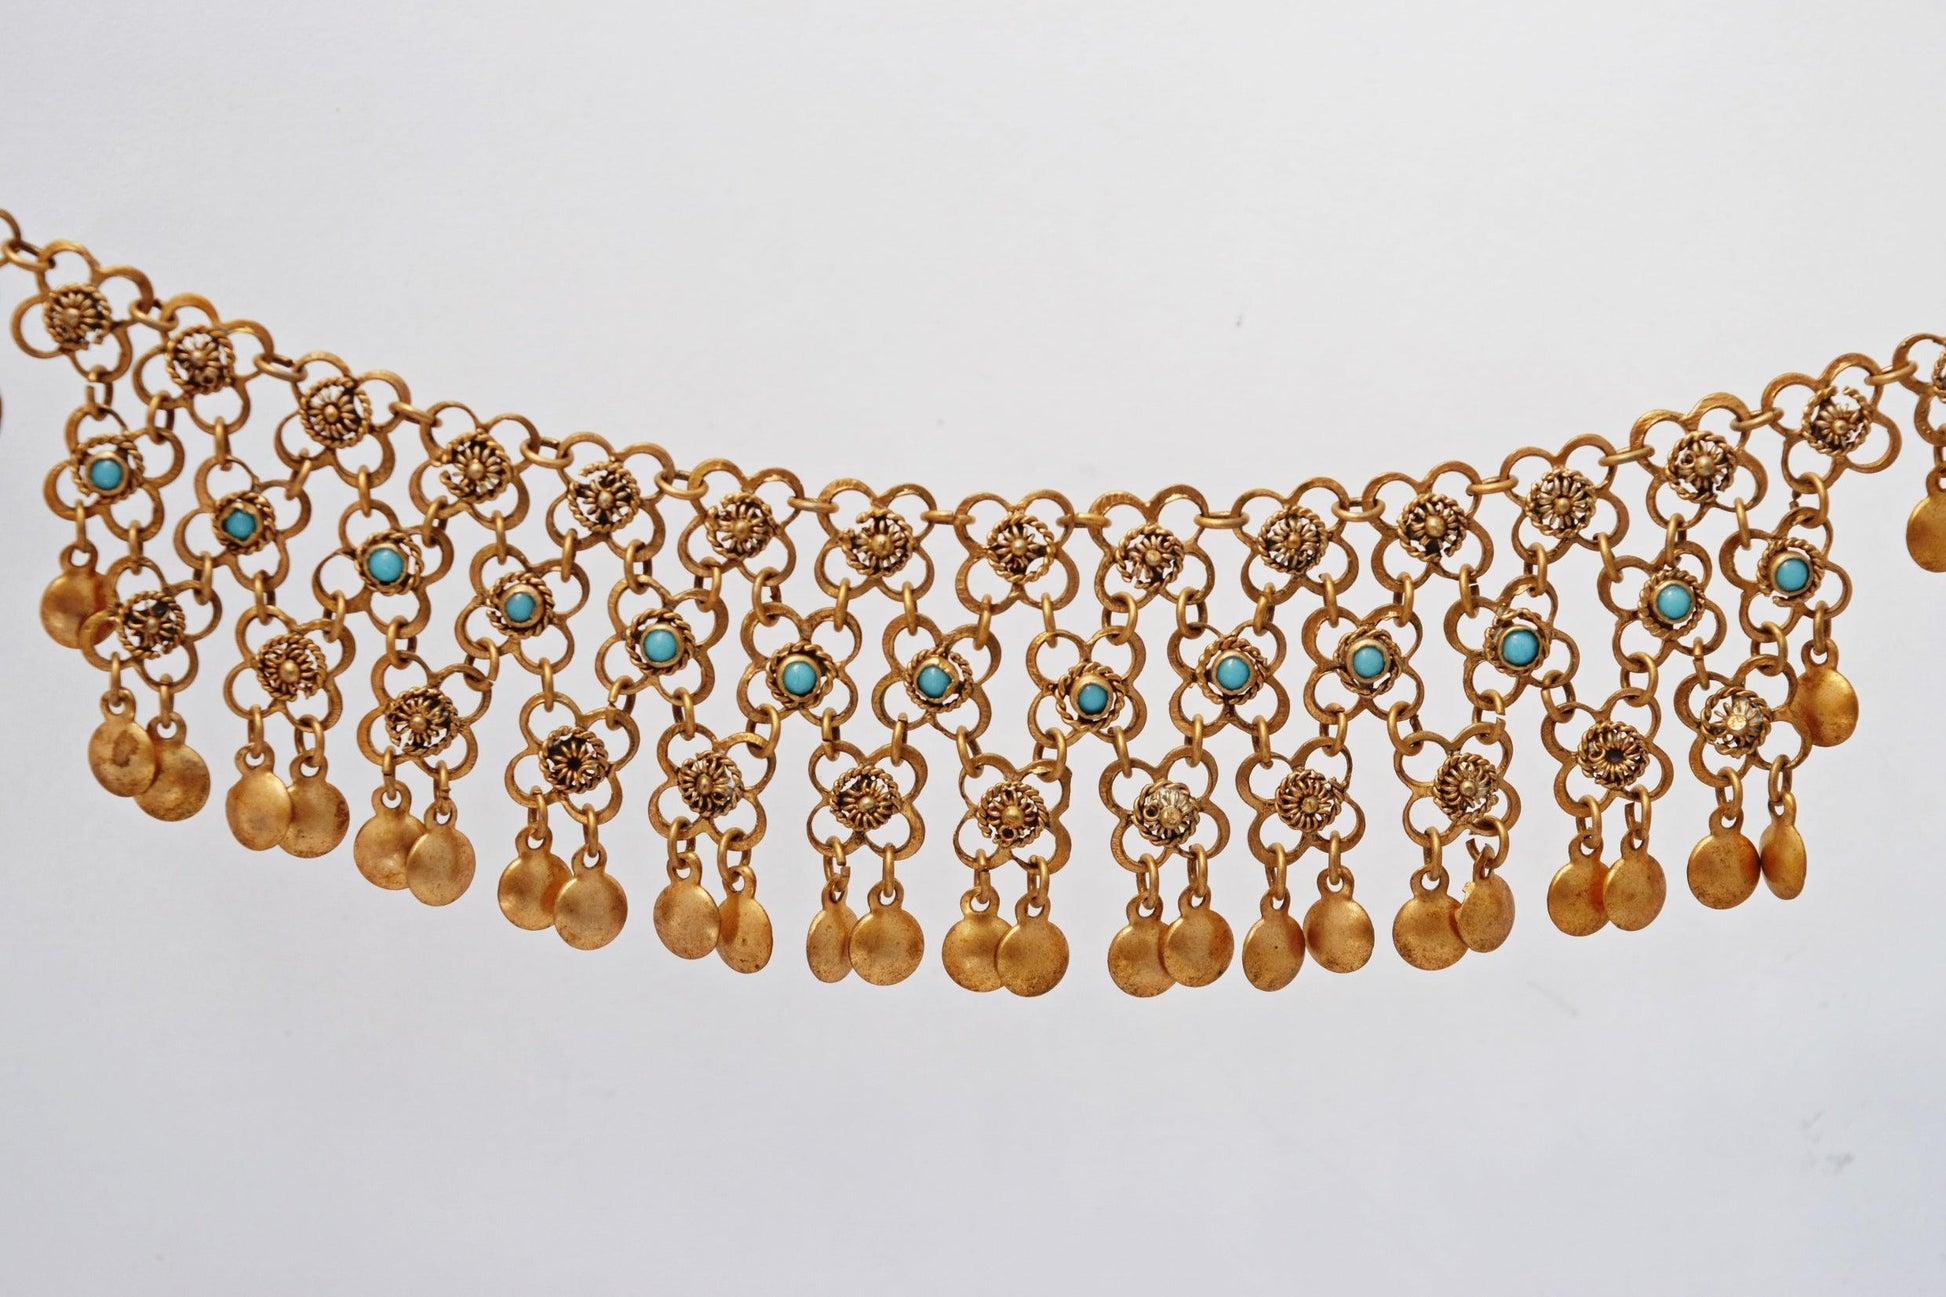 Ottoman style necklace